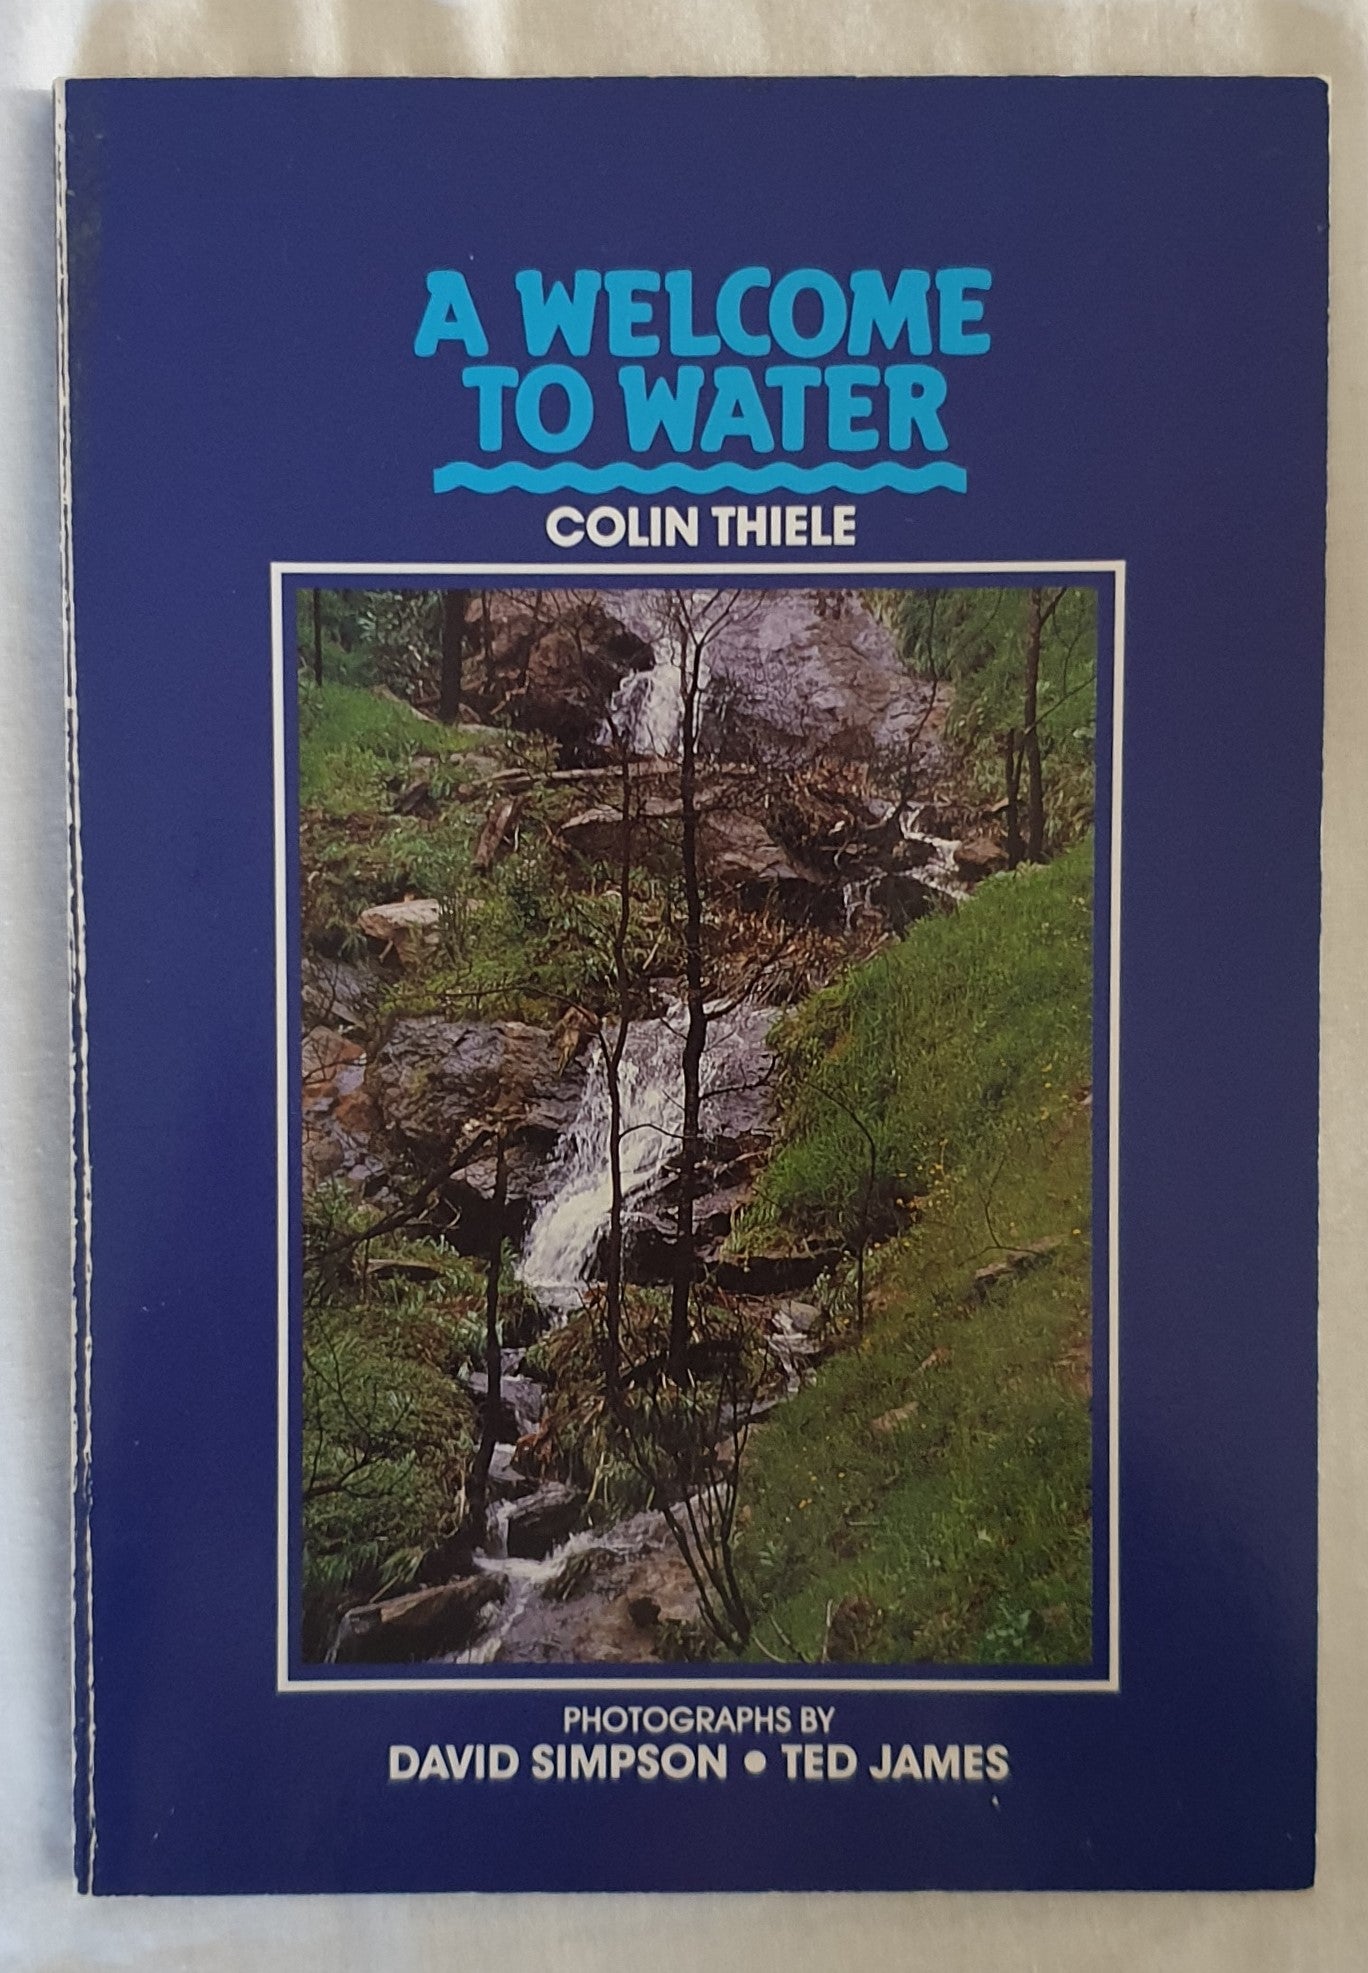 A Welcome to Water by Colin Thiele